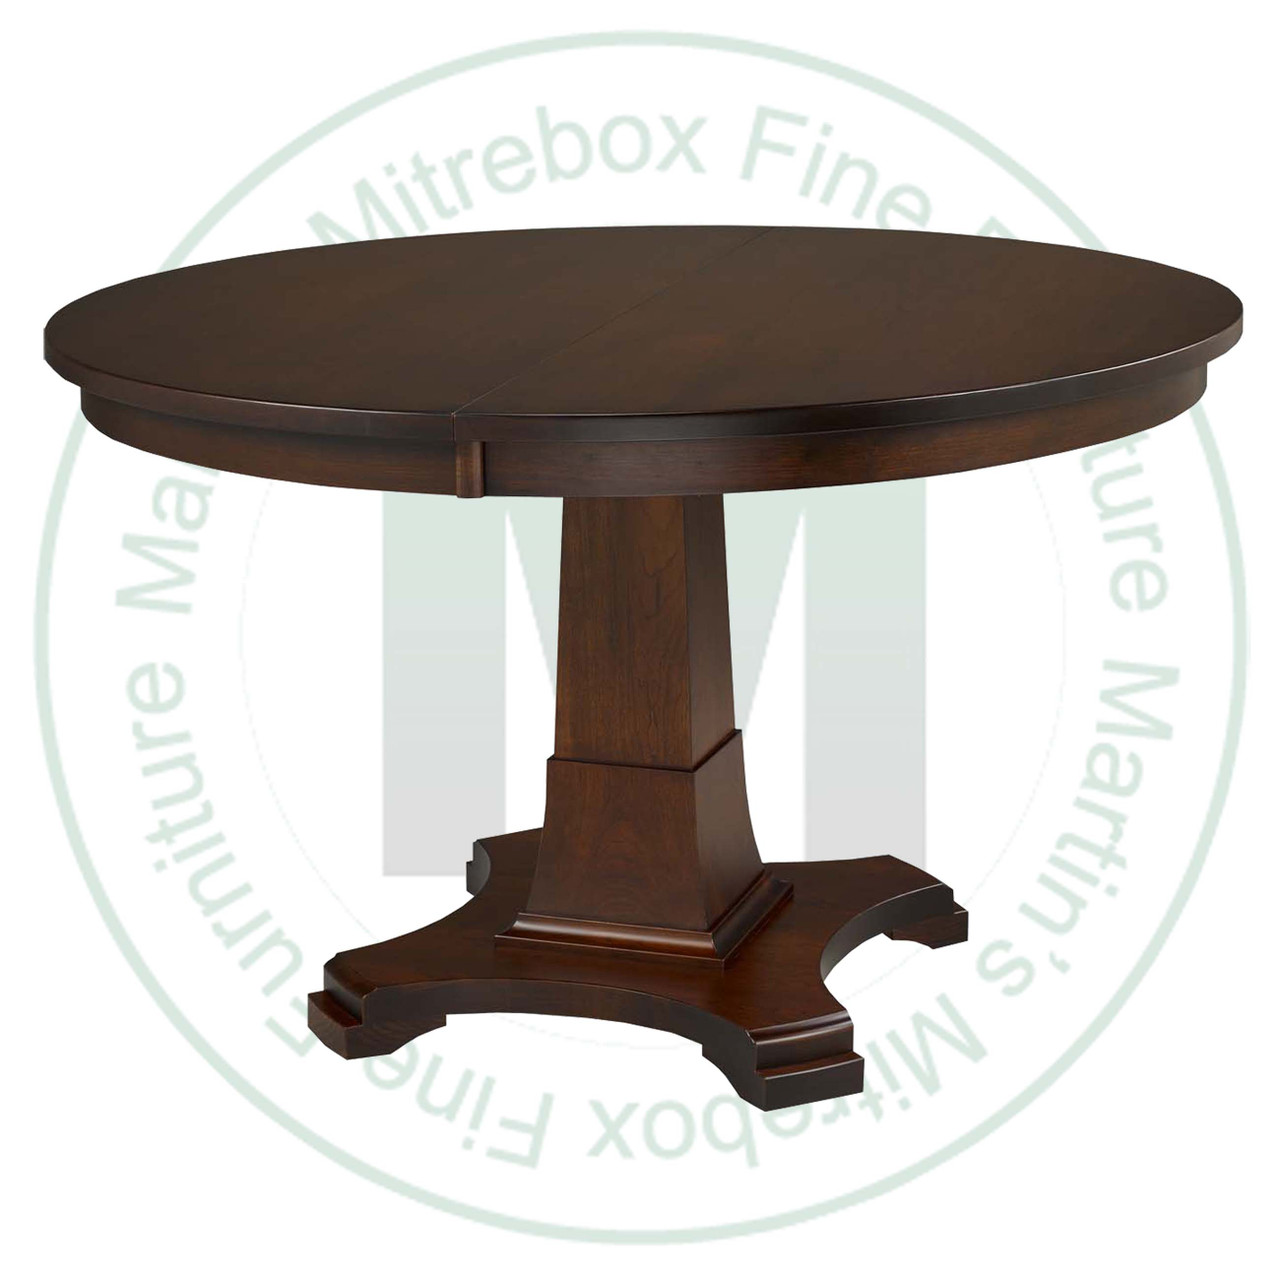 Oak Abbey Single Pedestal Table 36''D x 48''W x 30''H With 1 - 12'' Leaf. Table Has 1.25'' Thick Top